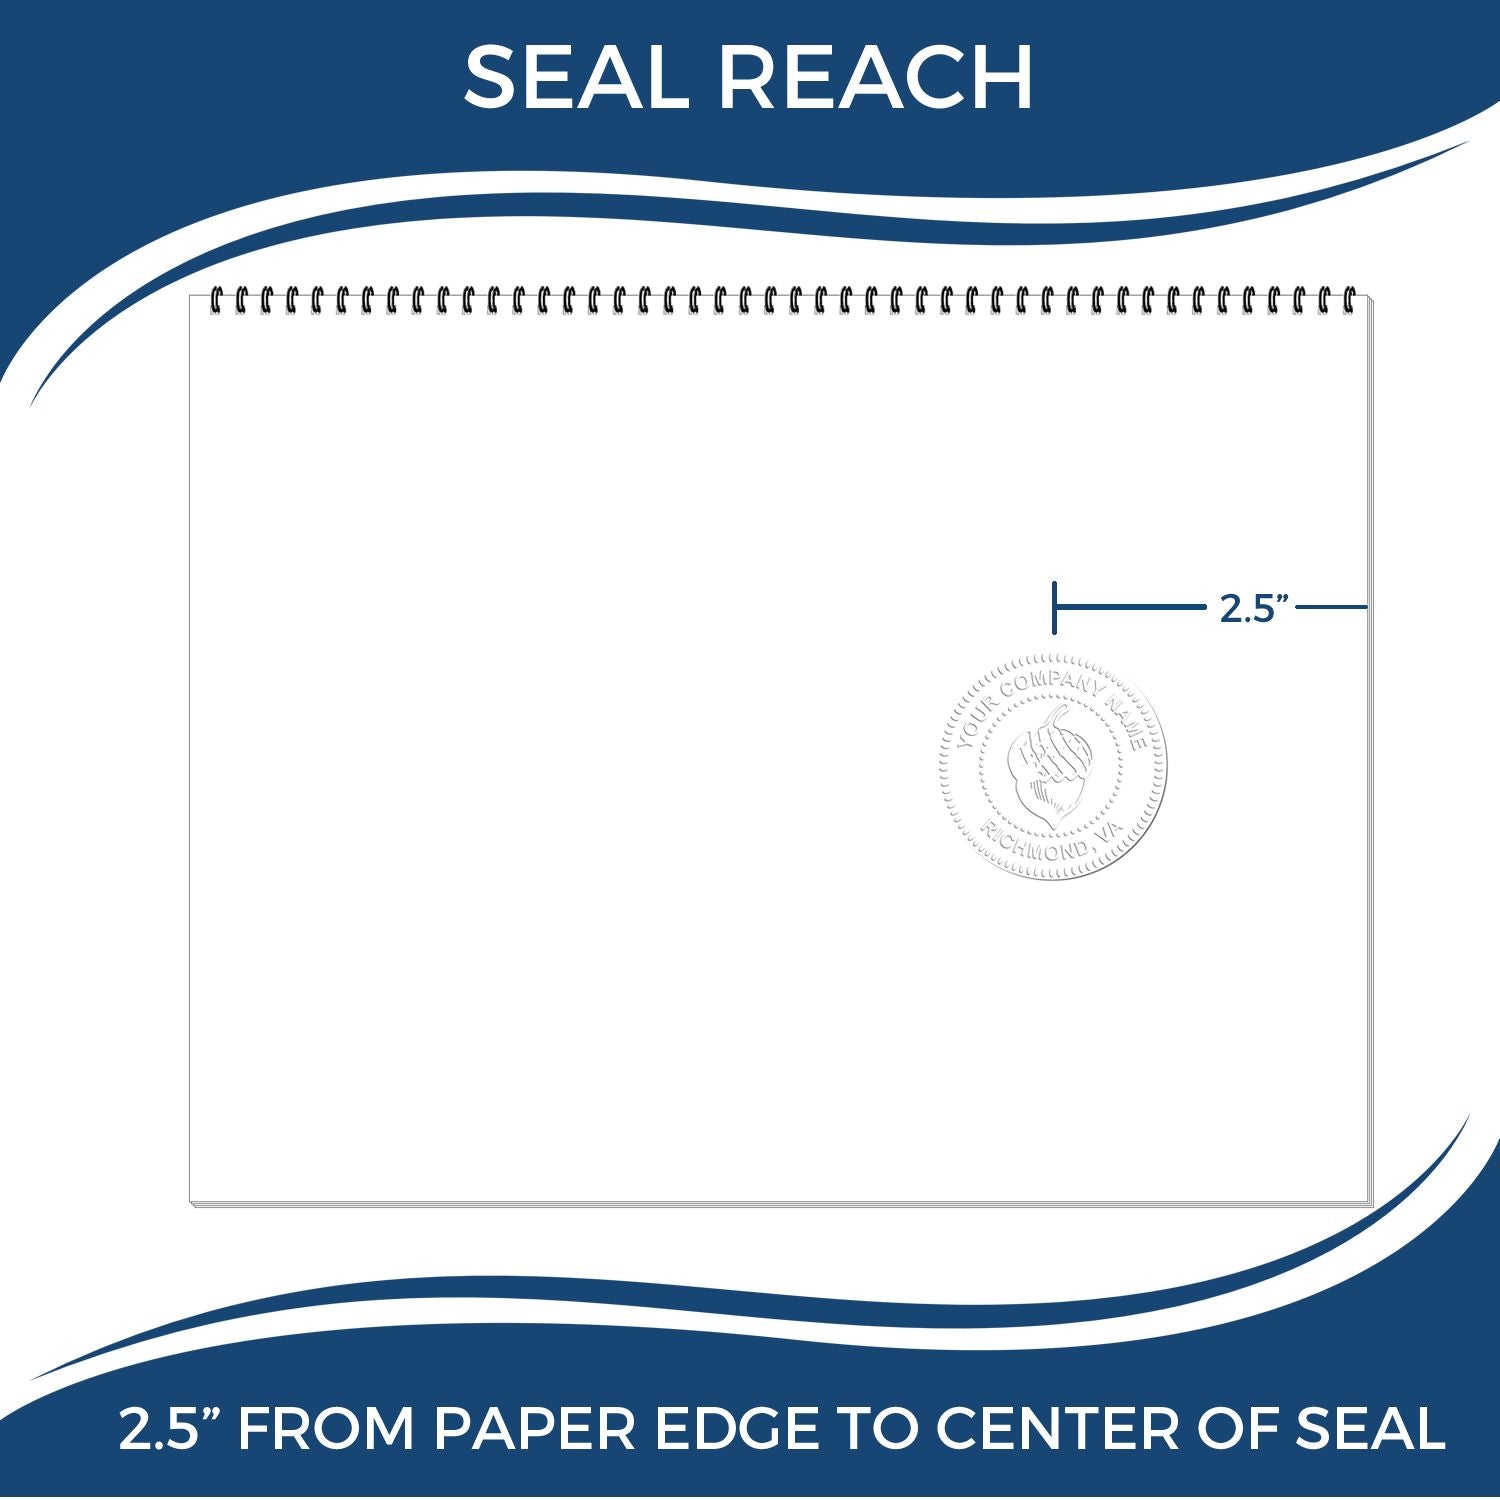 An infographic showing the seal reach which is represented by a ruler and a miniature seal image of the Heavy Duty Cast Iron Oklahoma Architect Embosser